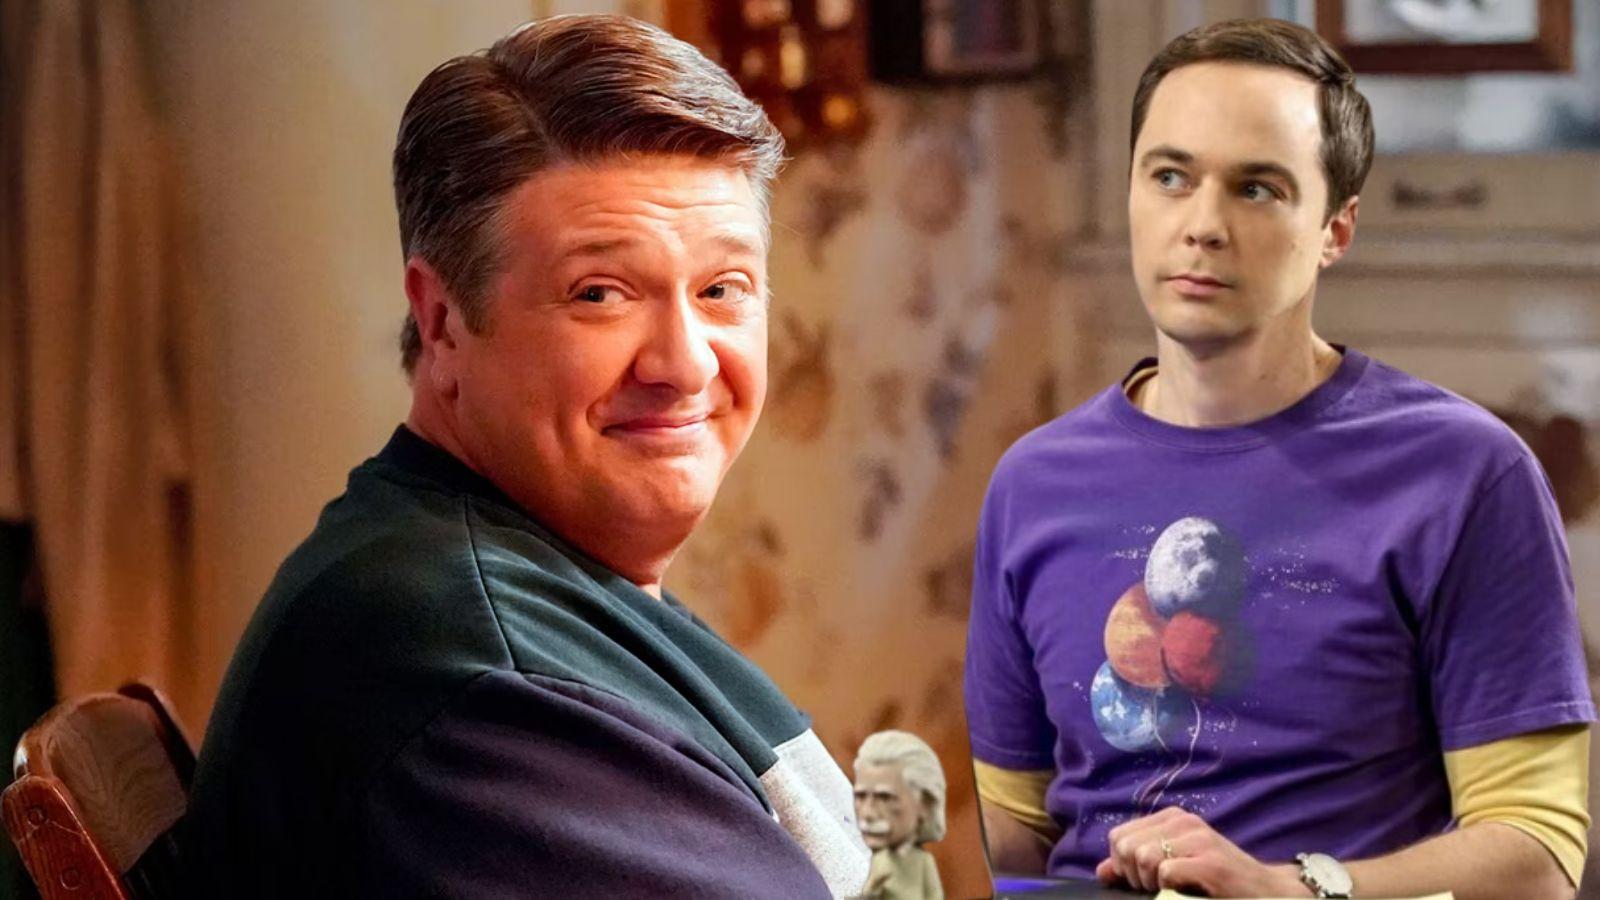 George and Sheldon Cooper in the Young Sheldon finale